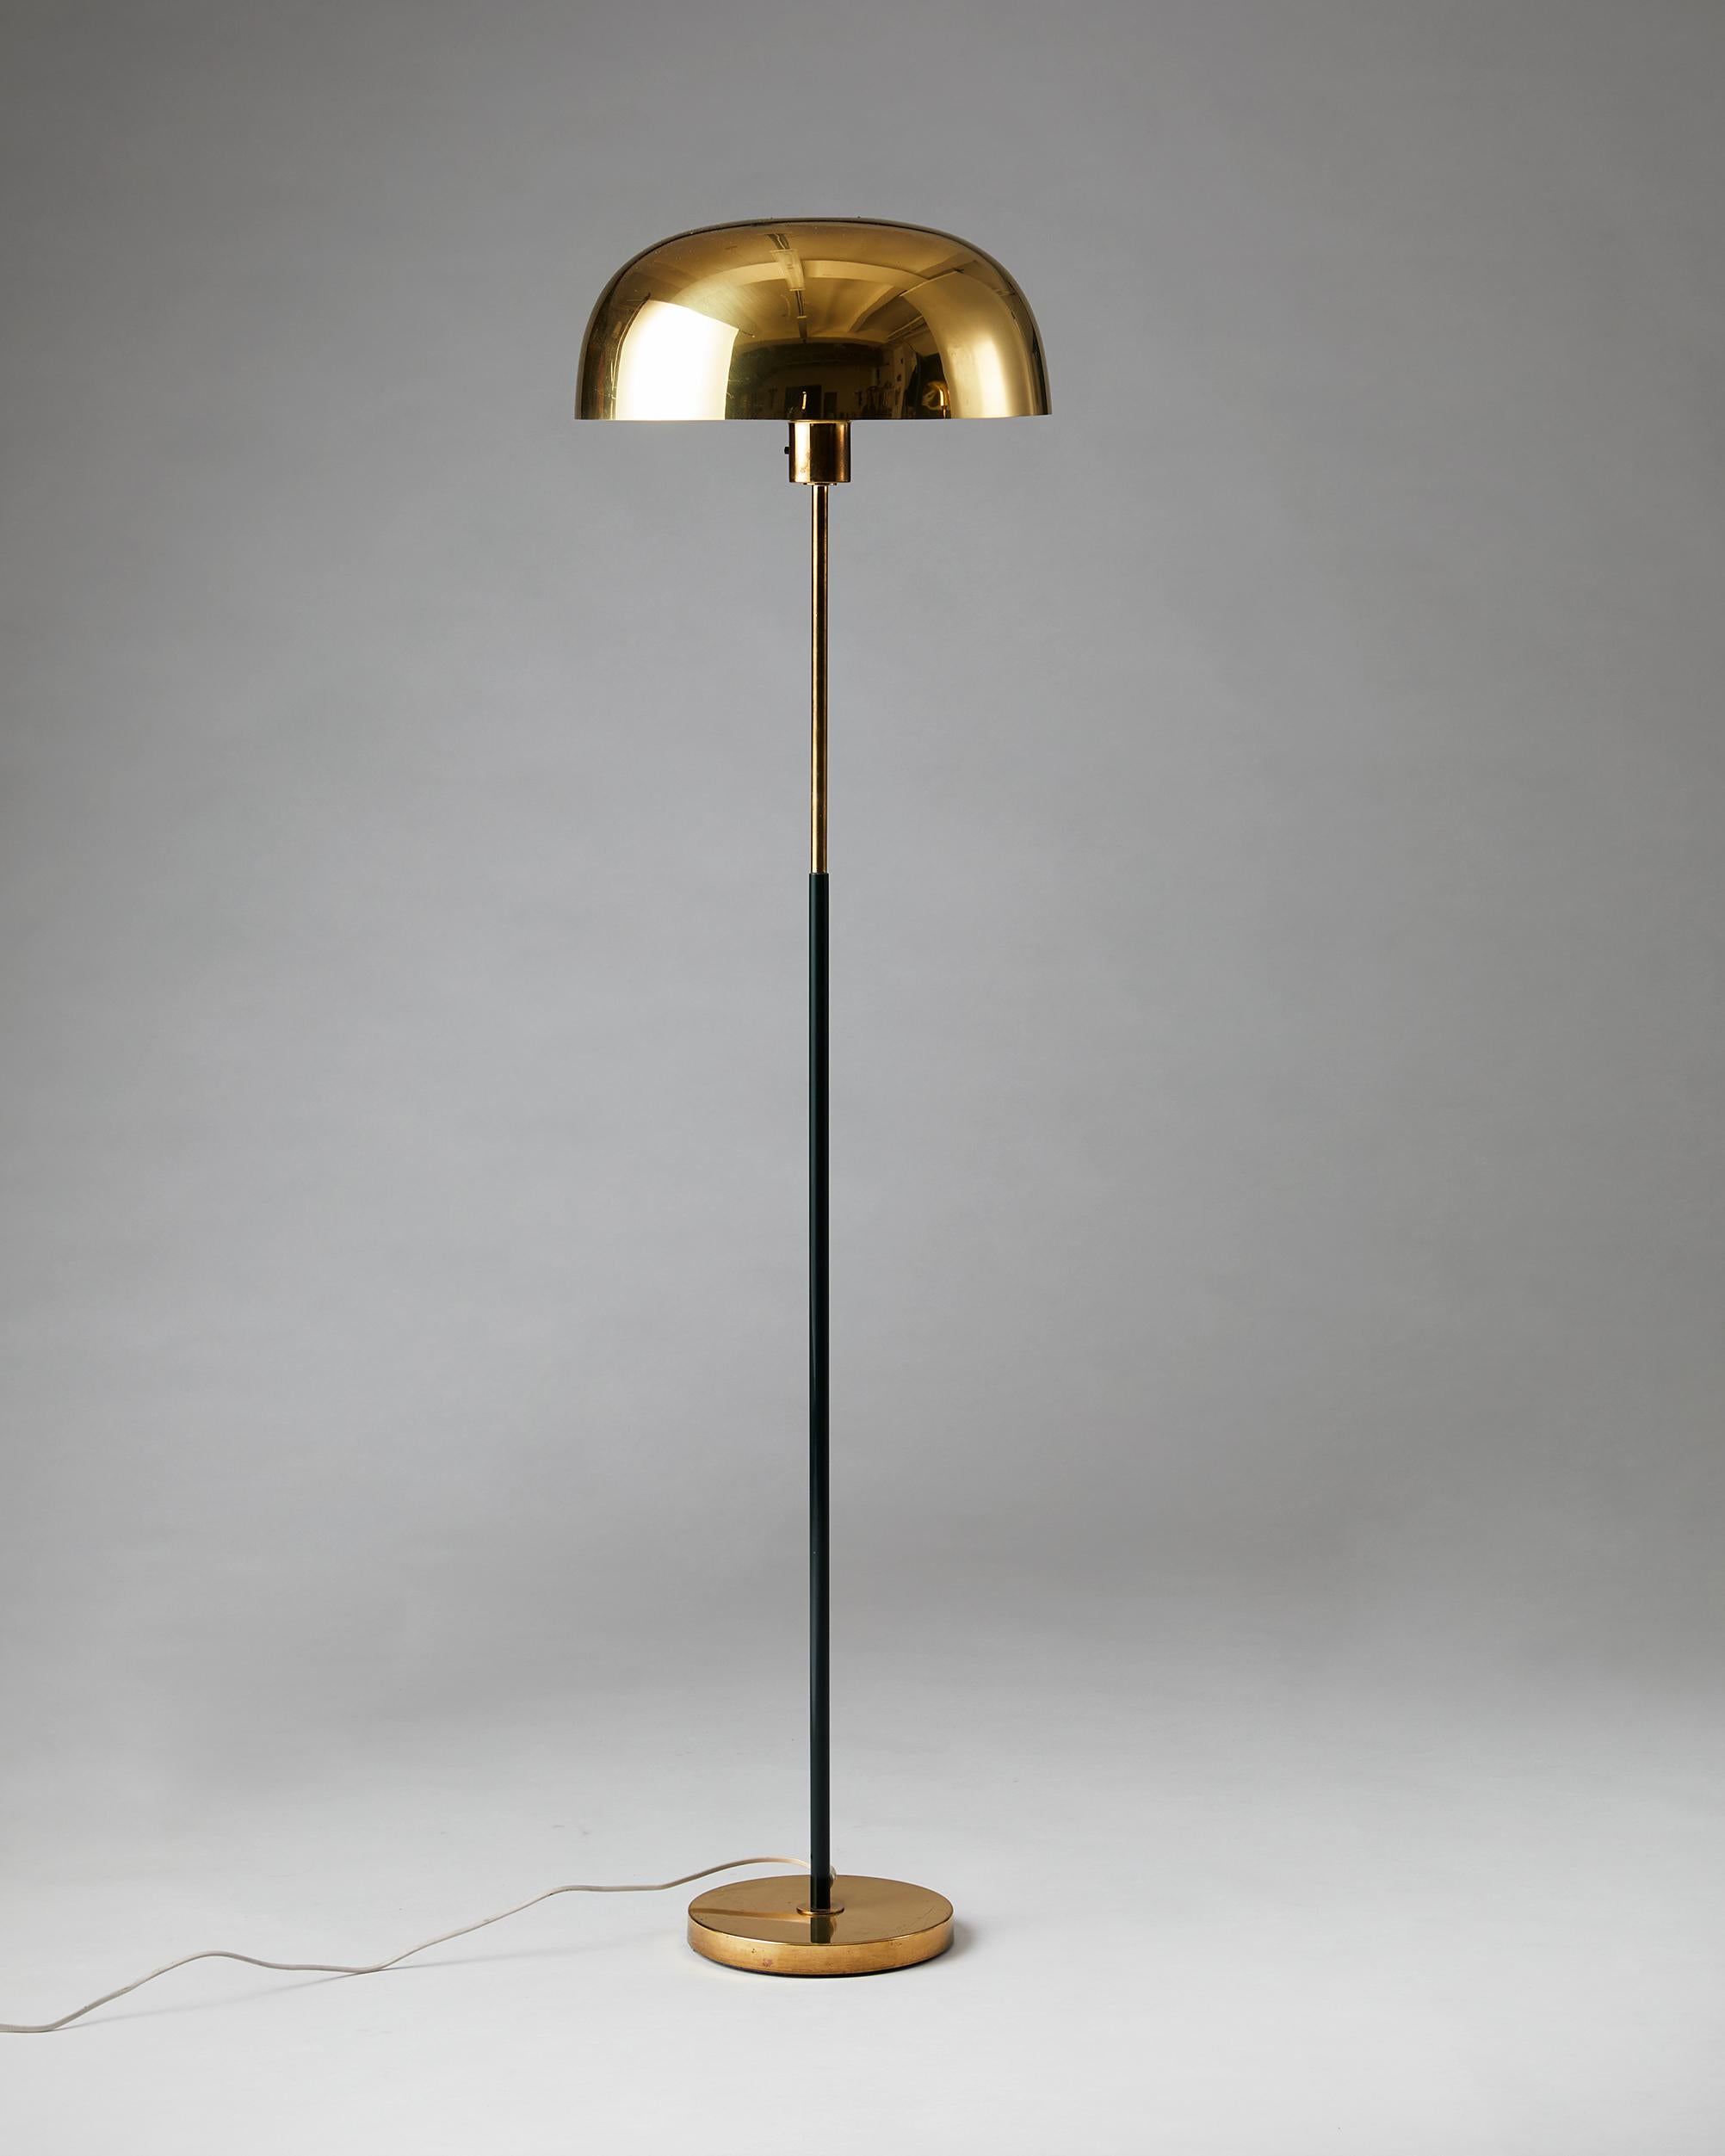 Brass and lacquered brass.

Measures: H 140 cm / 4' 7